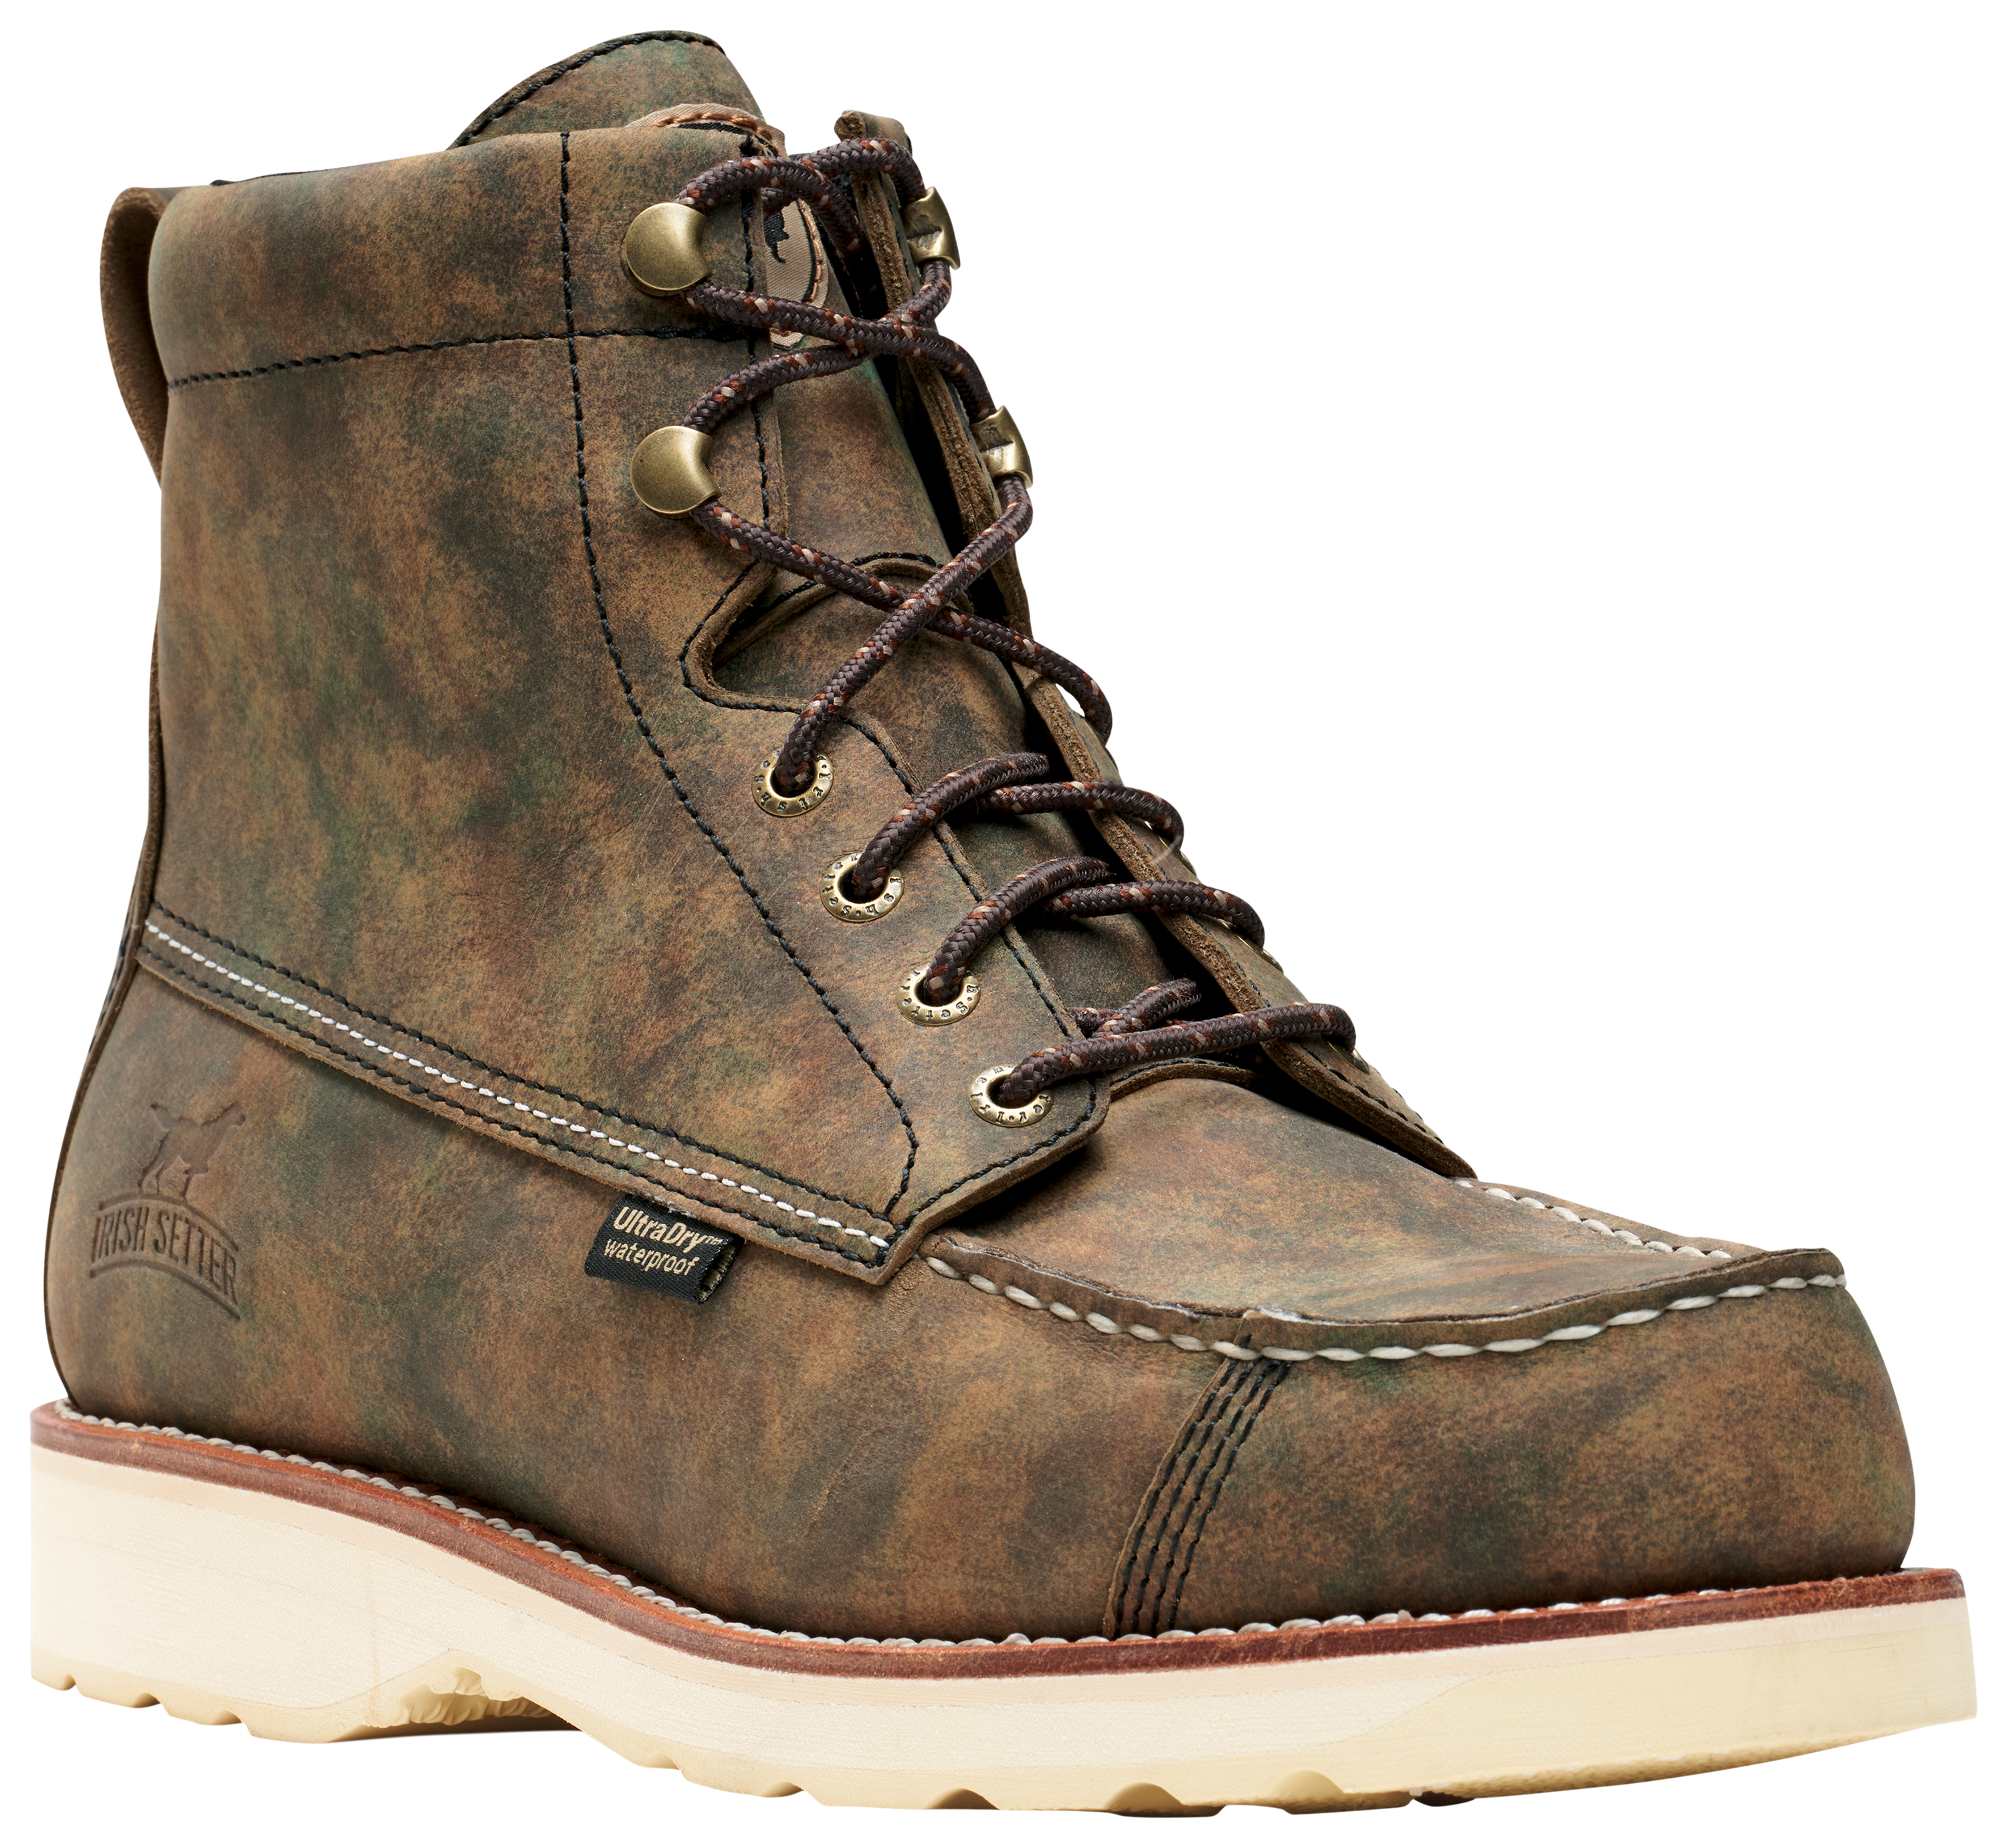 Irish Setter Wingshooter 7 Waterproof Hunting Boots for Men - Earth Camo - 10.5M